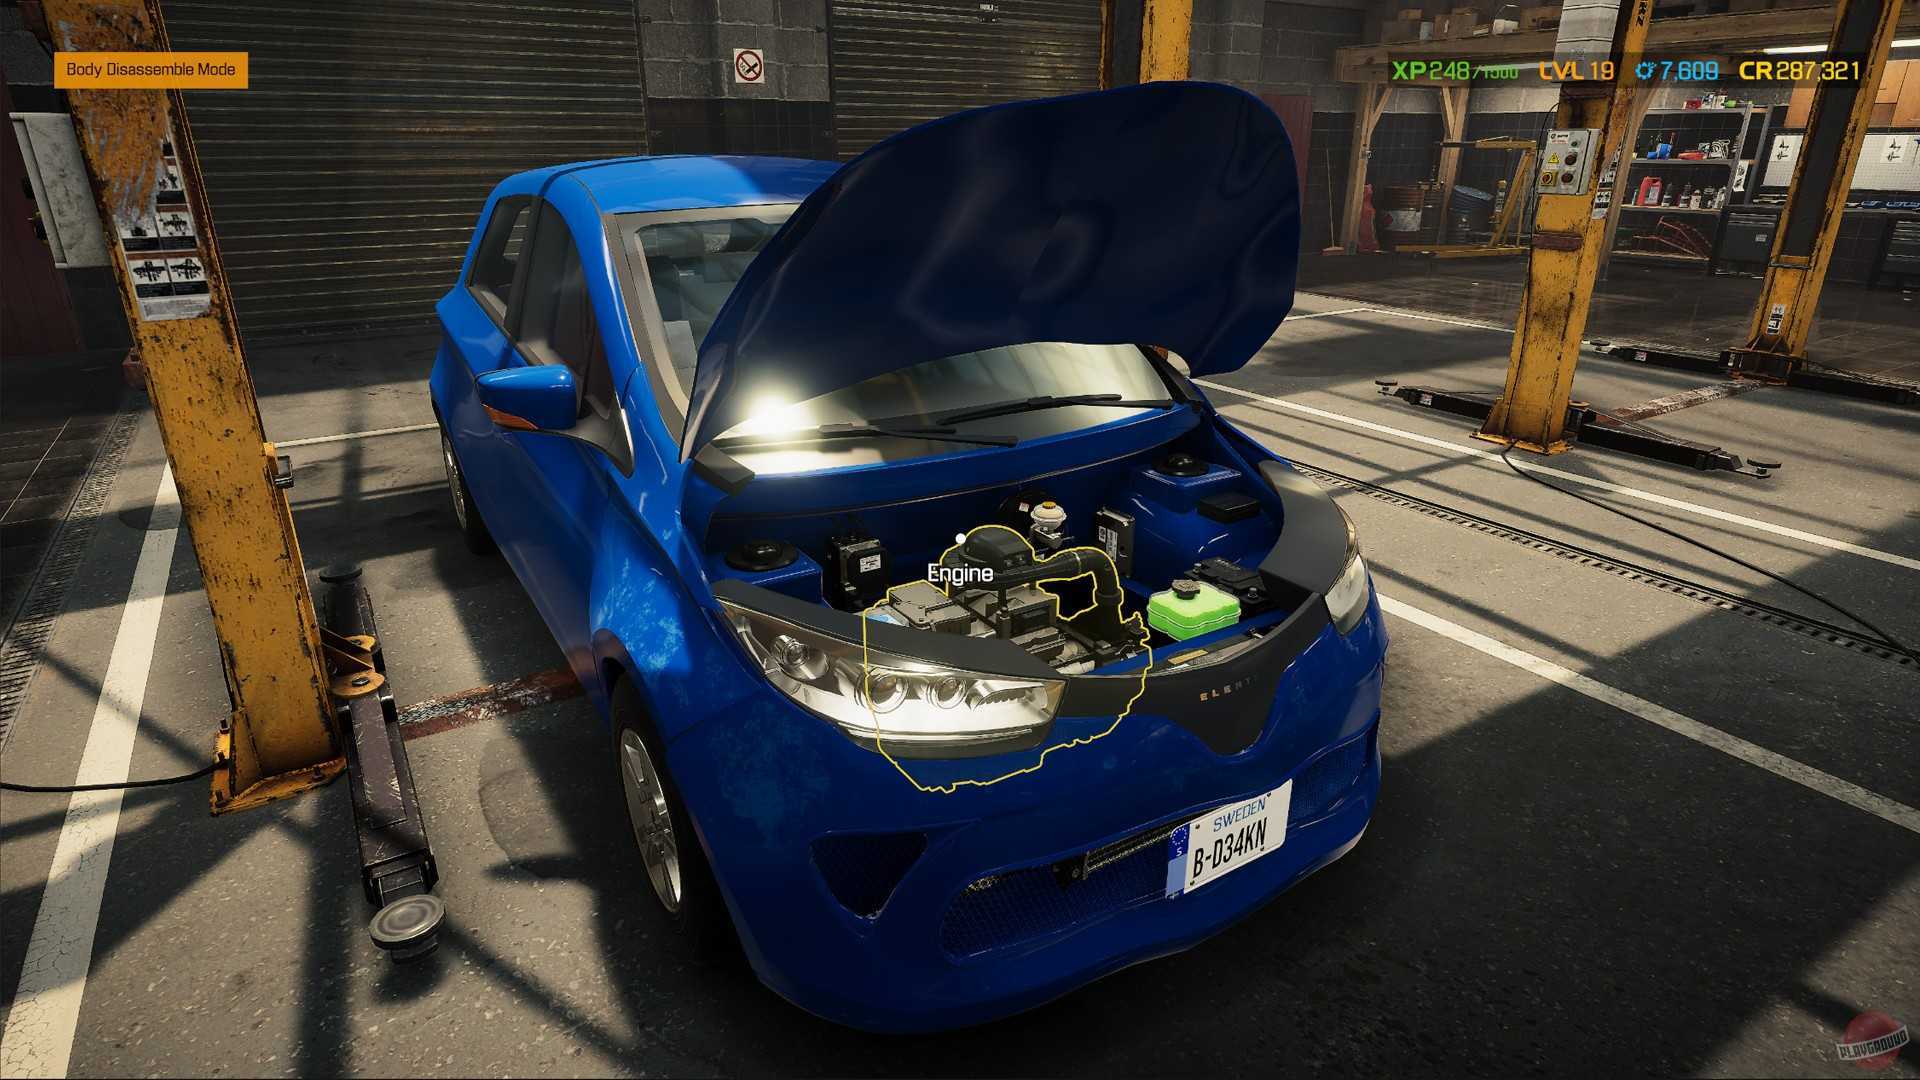 Car mechanic simulator 2018: how to fix errors, black screen, low fps and other problems